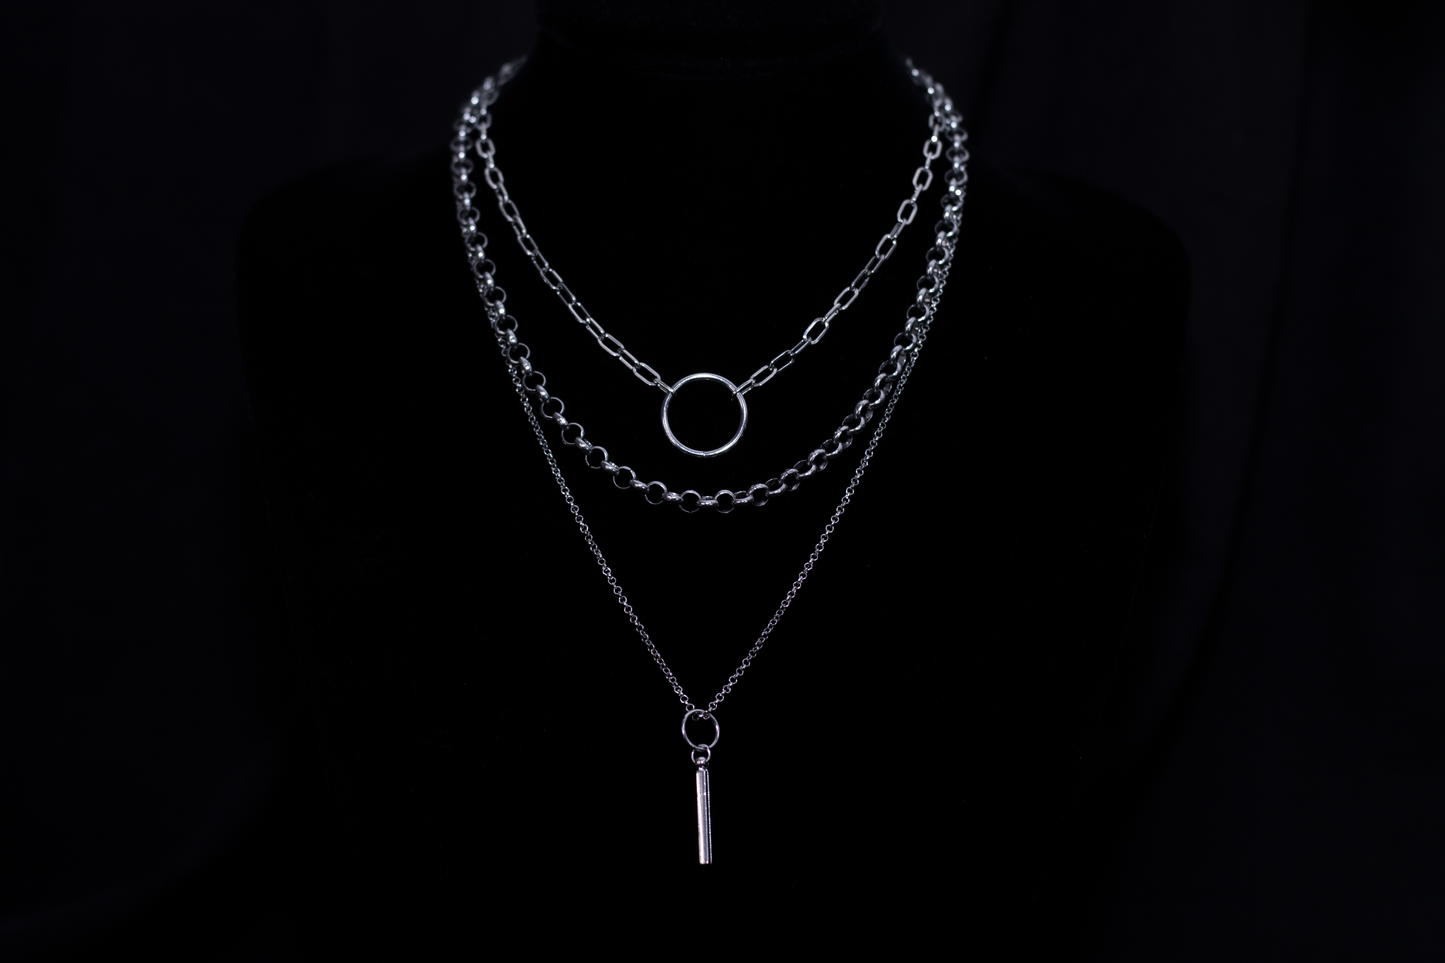 A striking Myril Jewels punk multi-chain necklace set against a black backdrop, featuring layered chains and a central hoop, epitomizing the bold, dark-avantgarde style of neo-goth fashion.